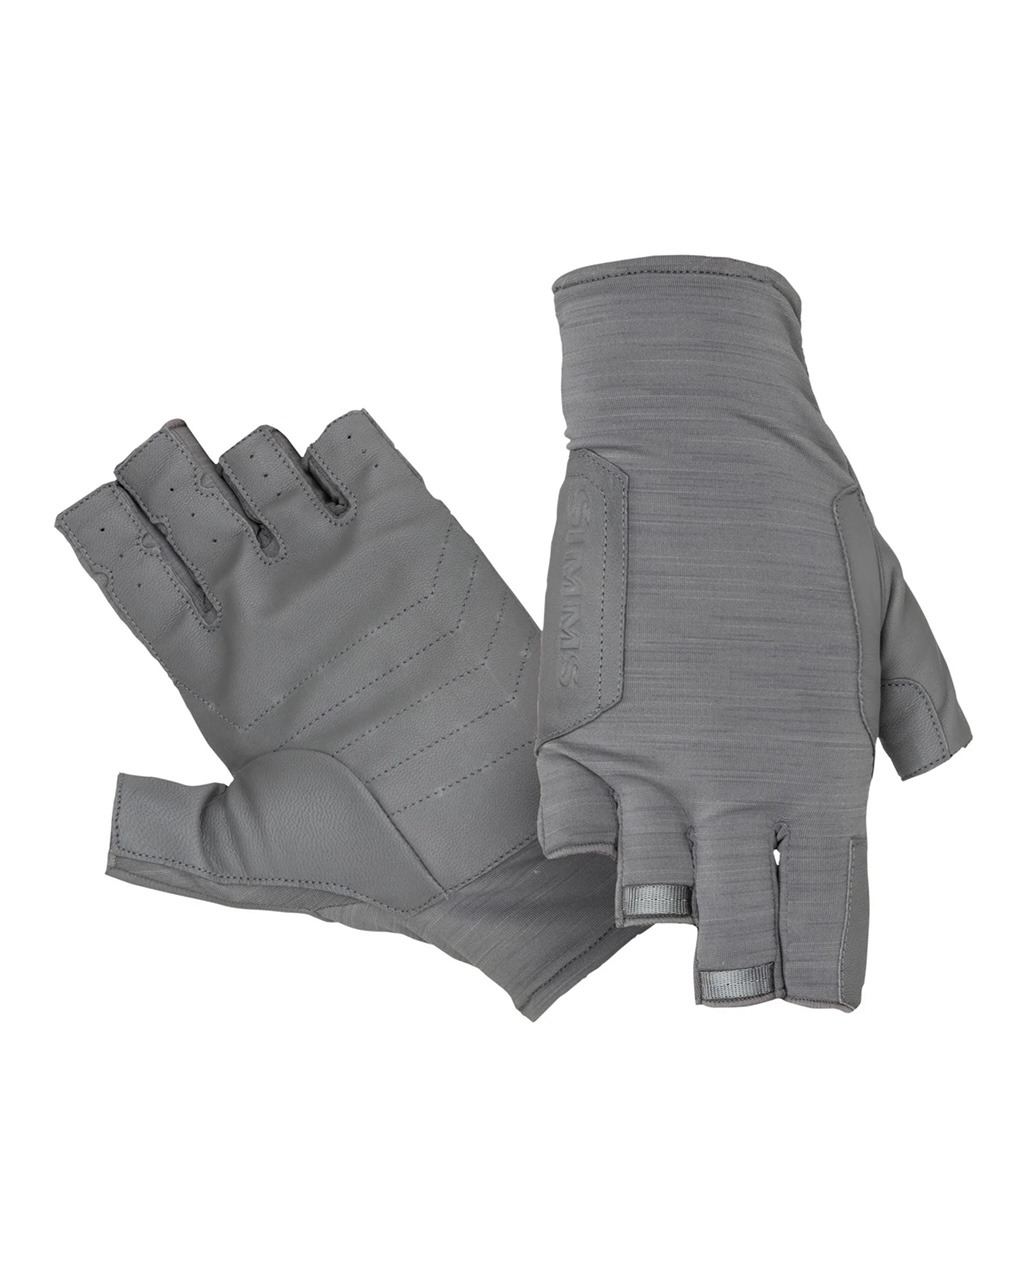 Simms Solarflex Guide Glove - Sterling - Large